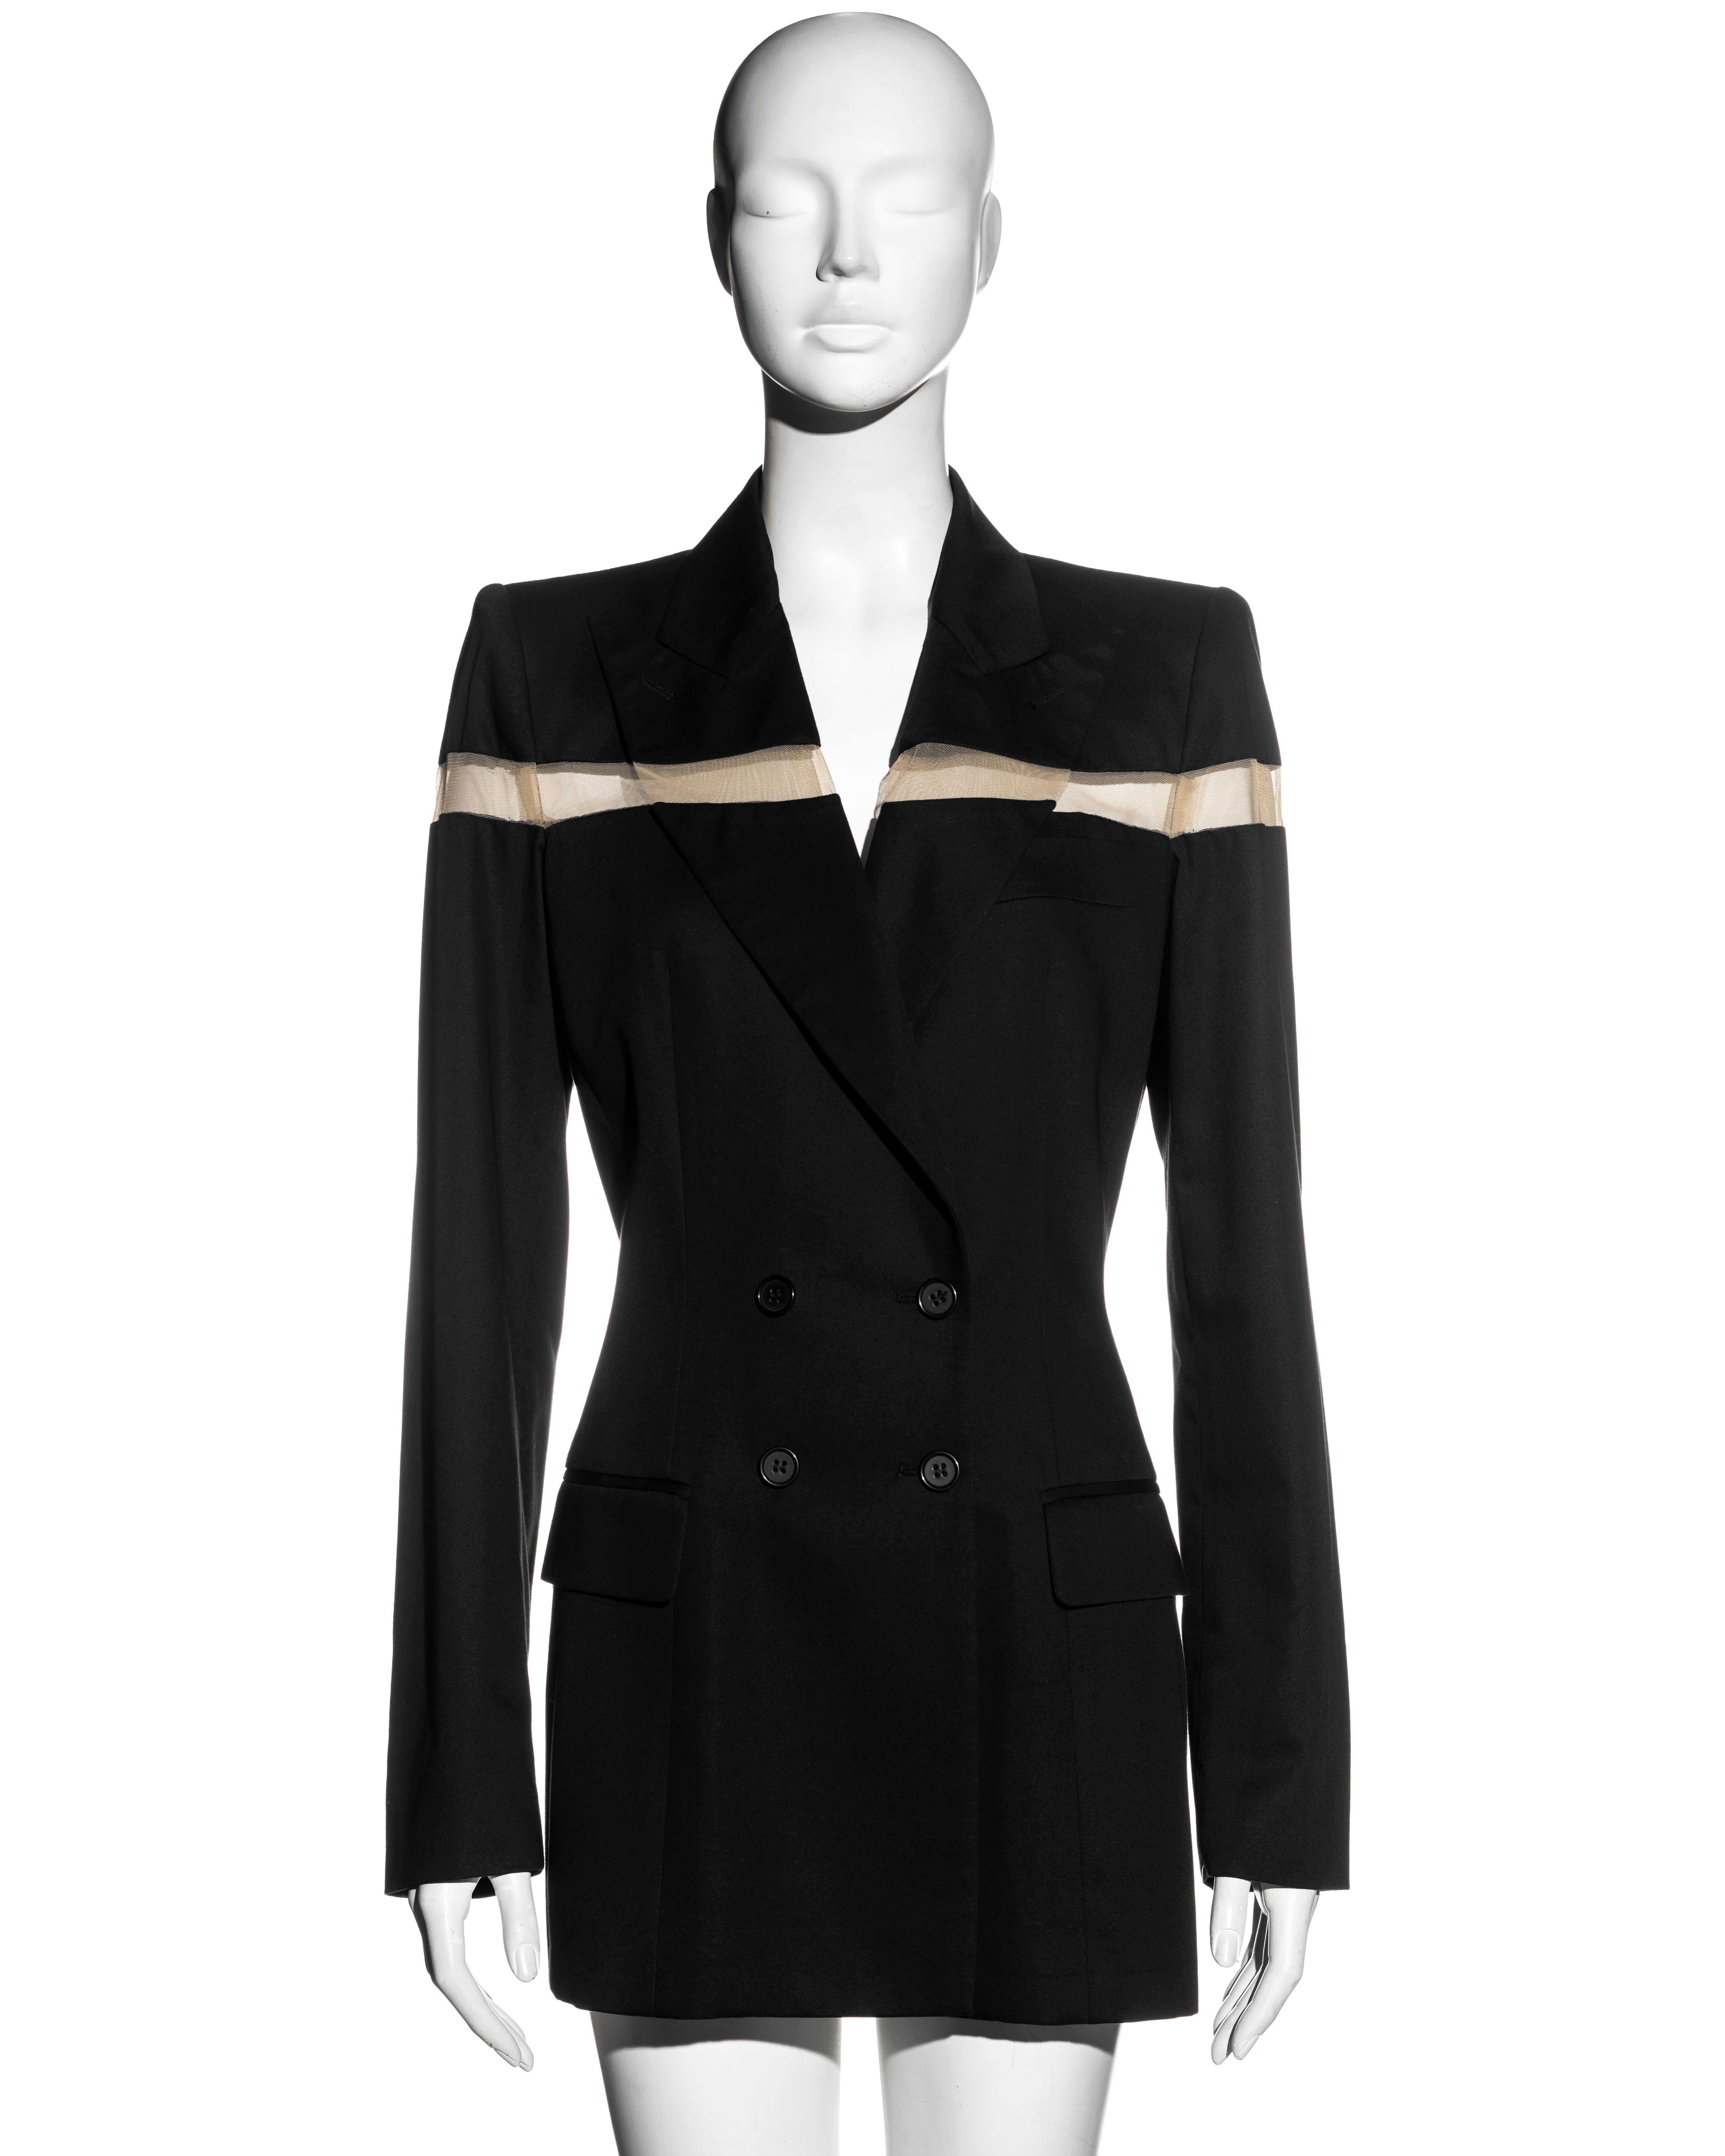 ▪ Alexander McQueen black blazer mini dress
▪ Double-breasted
▪ Nude nylon mesh cut-out panel 
▪ Peak lapels 
▪ 2 front flap pockets 
▪ Padded shoulders 
▪ New with tags
▪ IT 44 - FR 40 - UK 12 - US 8
▪ 100% Cotton  Mesh: 95% Nylon, 5% Elastic 
▪